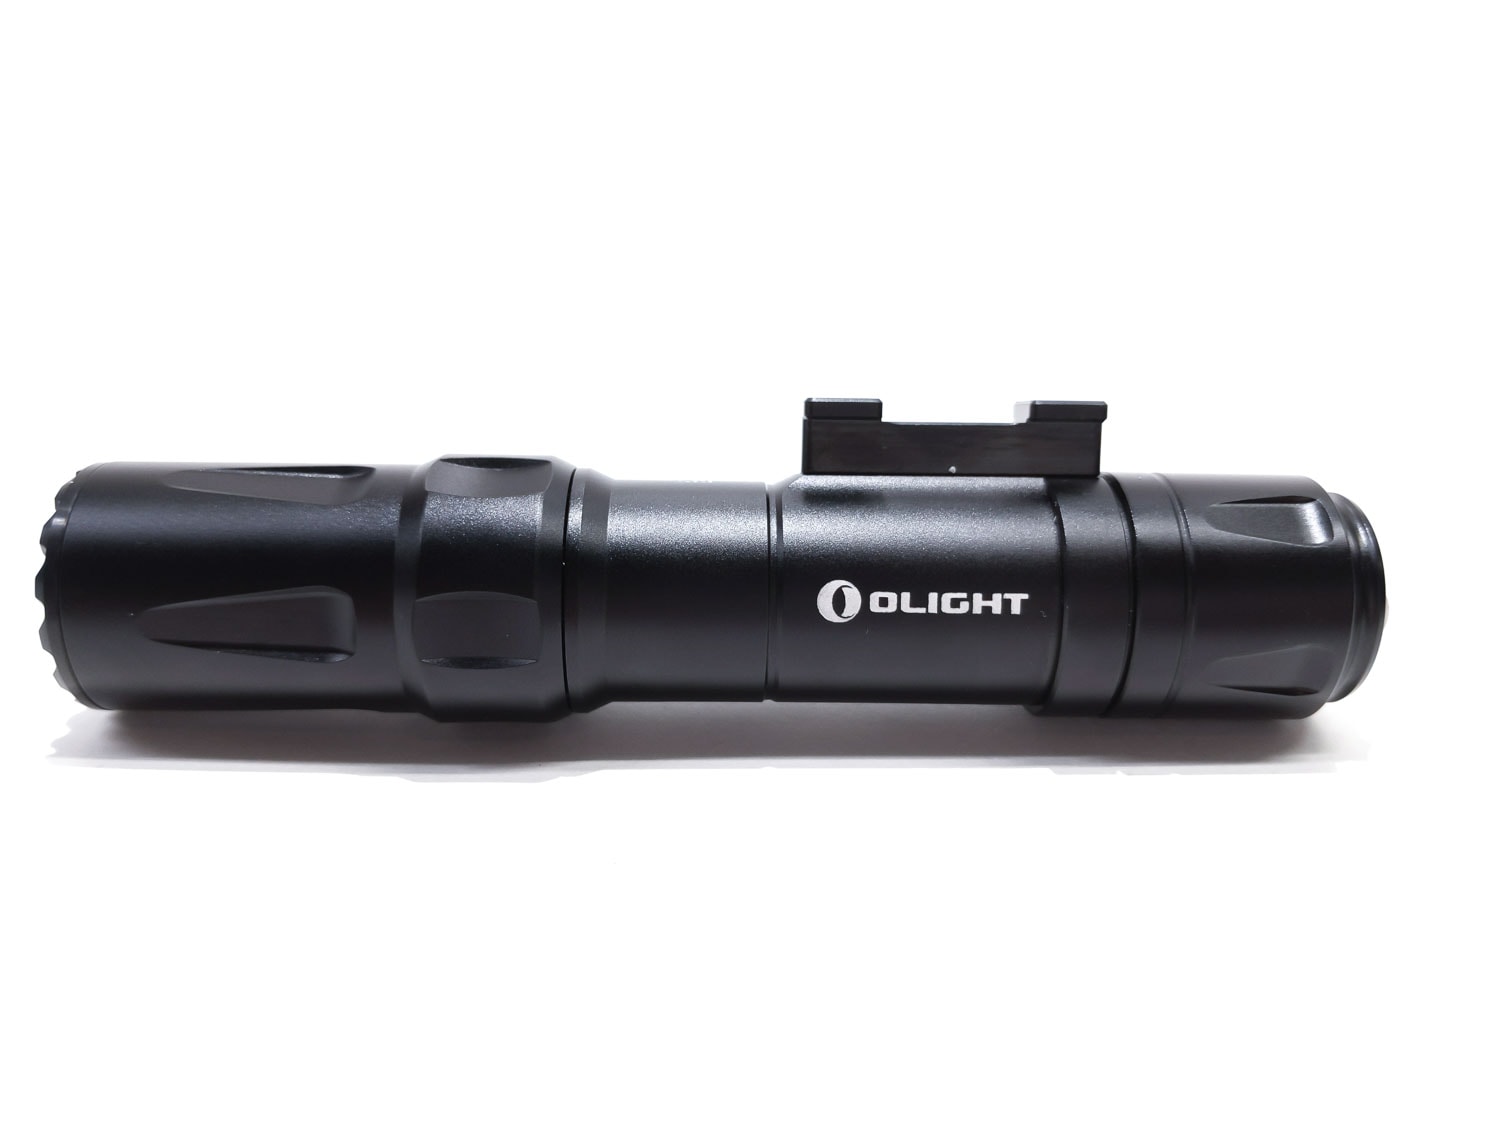 Olight Odin flashlight review (Limited Edition) | Weapon-mounted flashlight